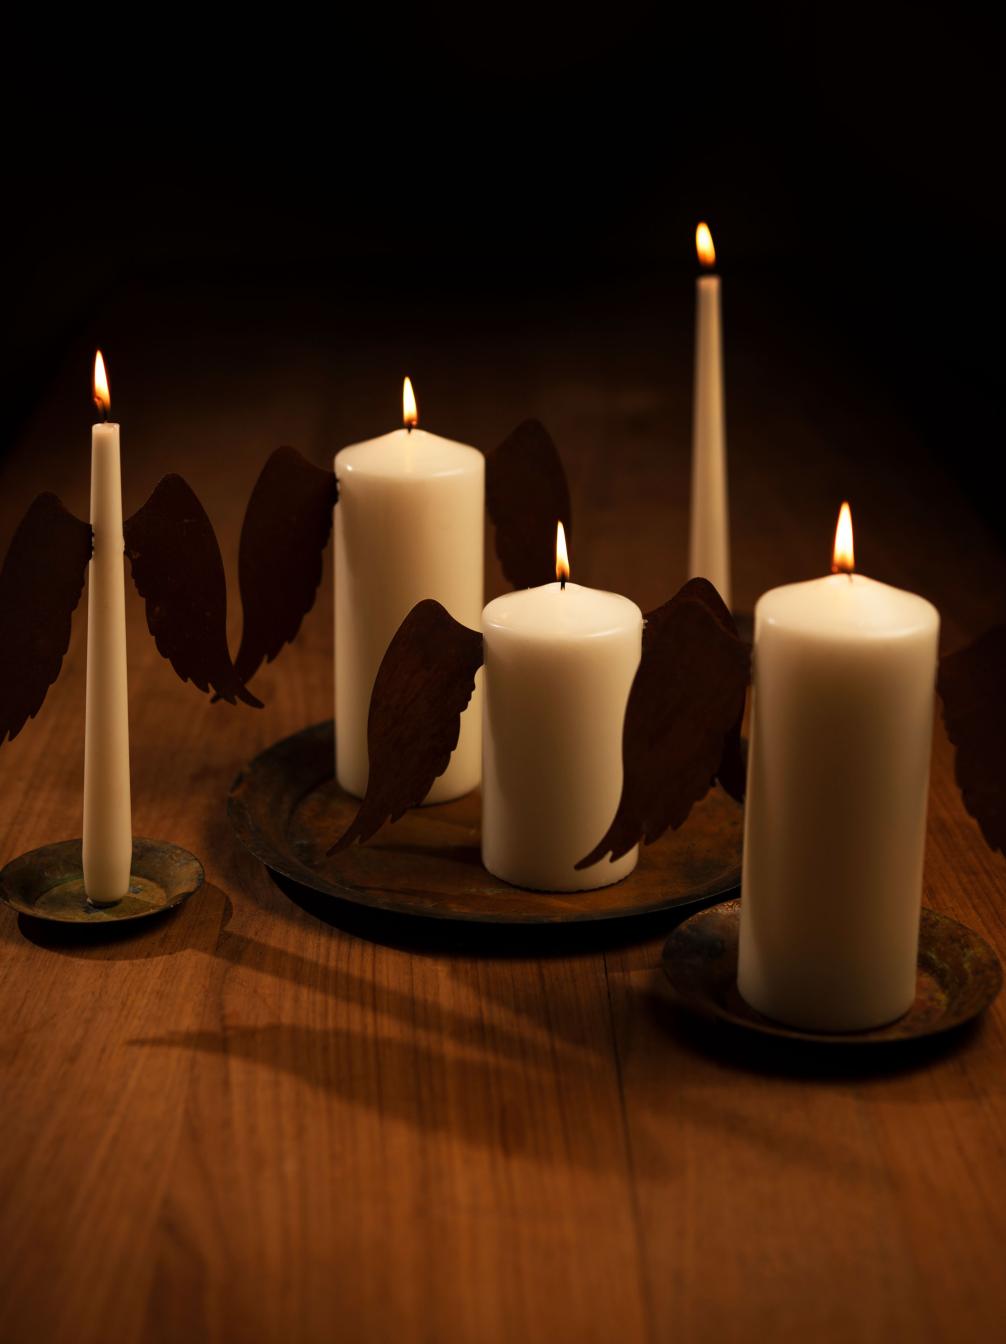 Rusty Metal Wings, Church Candles